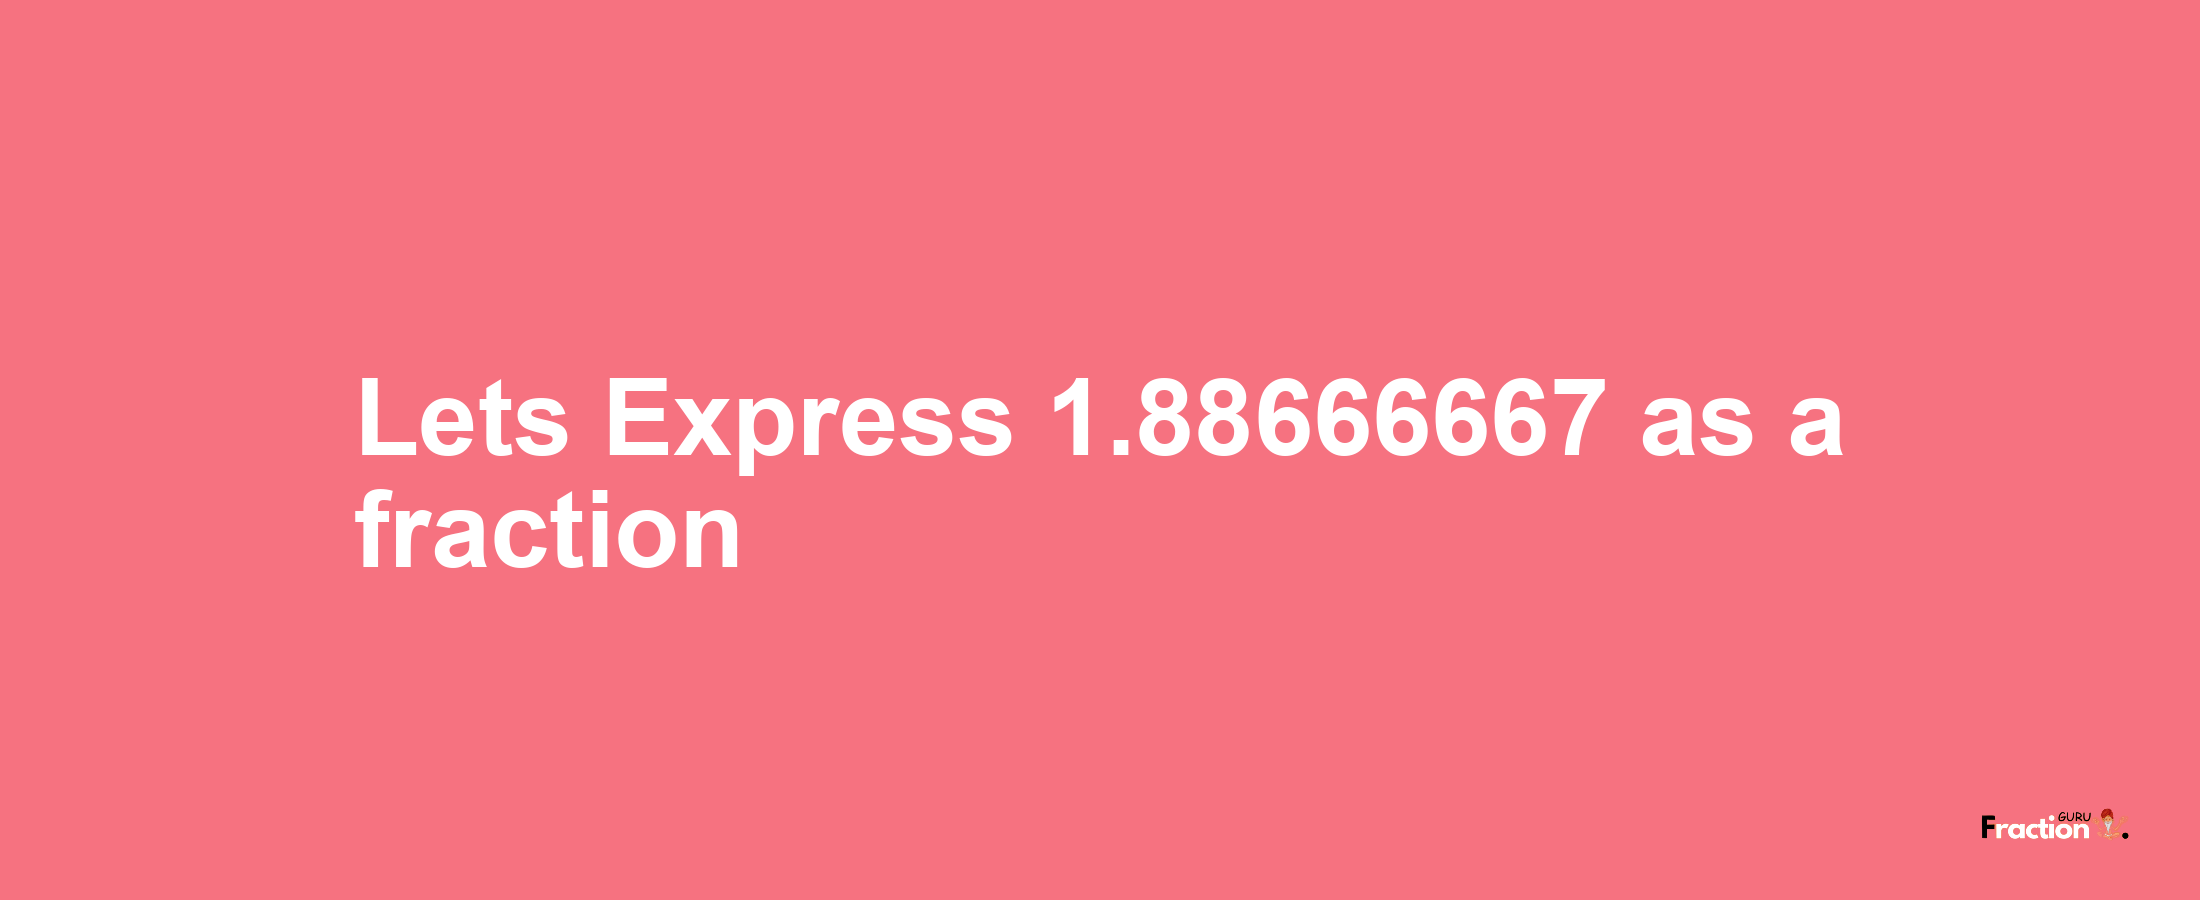 Lets Express 1.88666667 as afraction